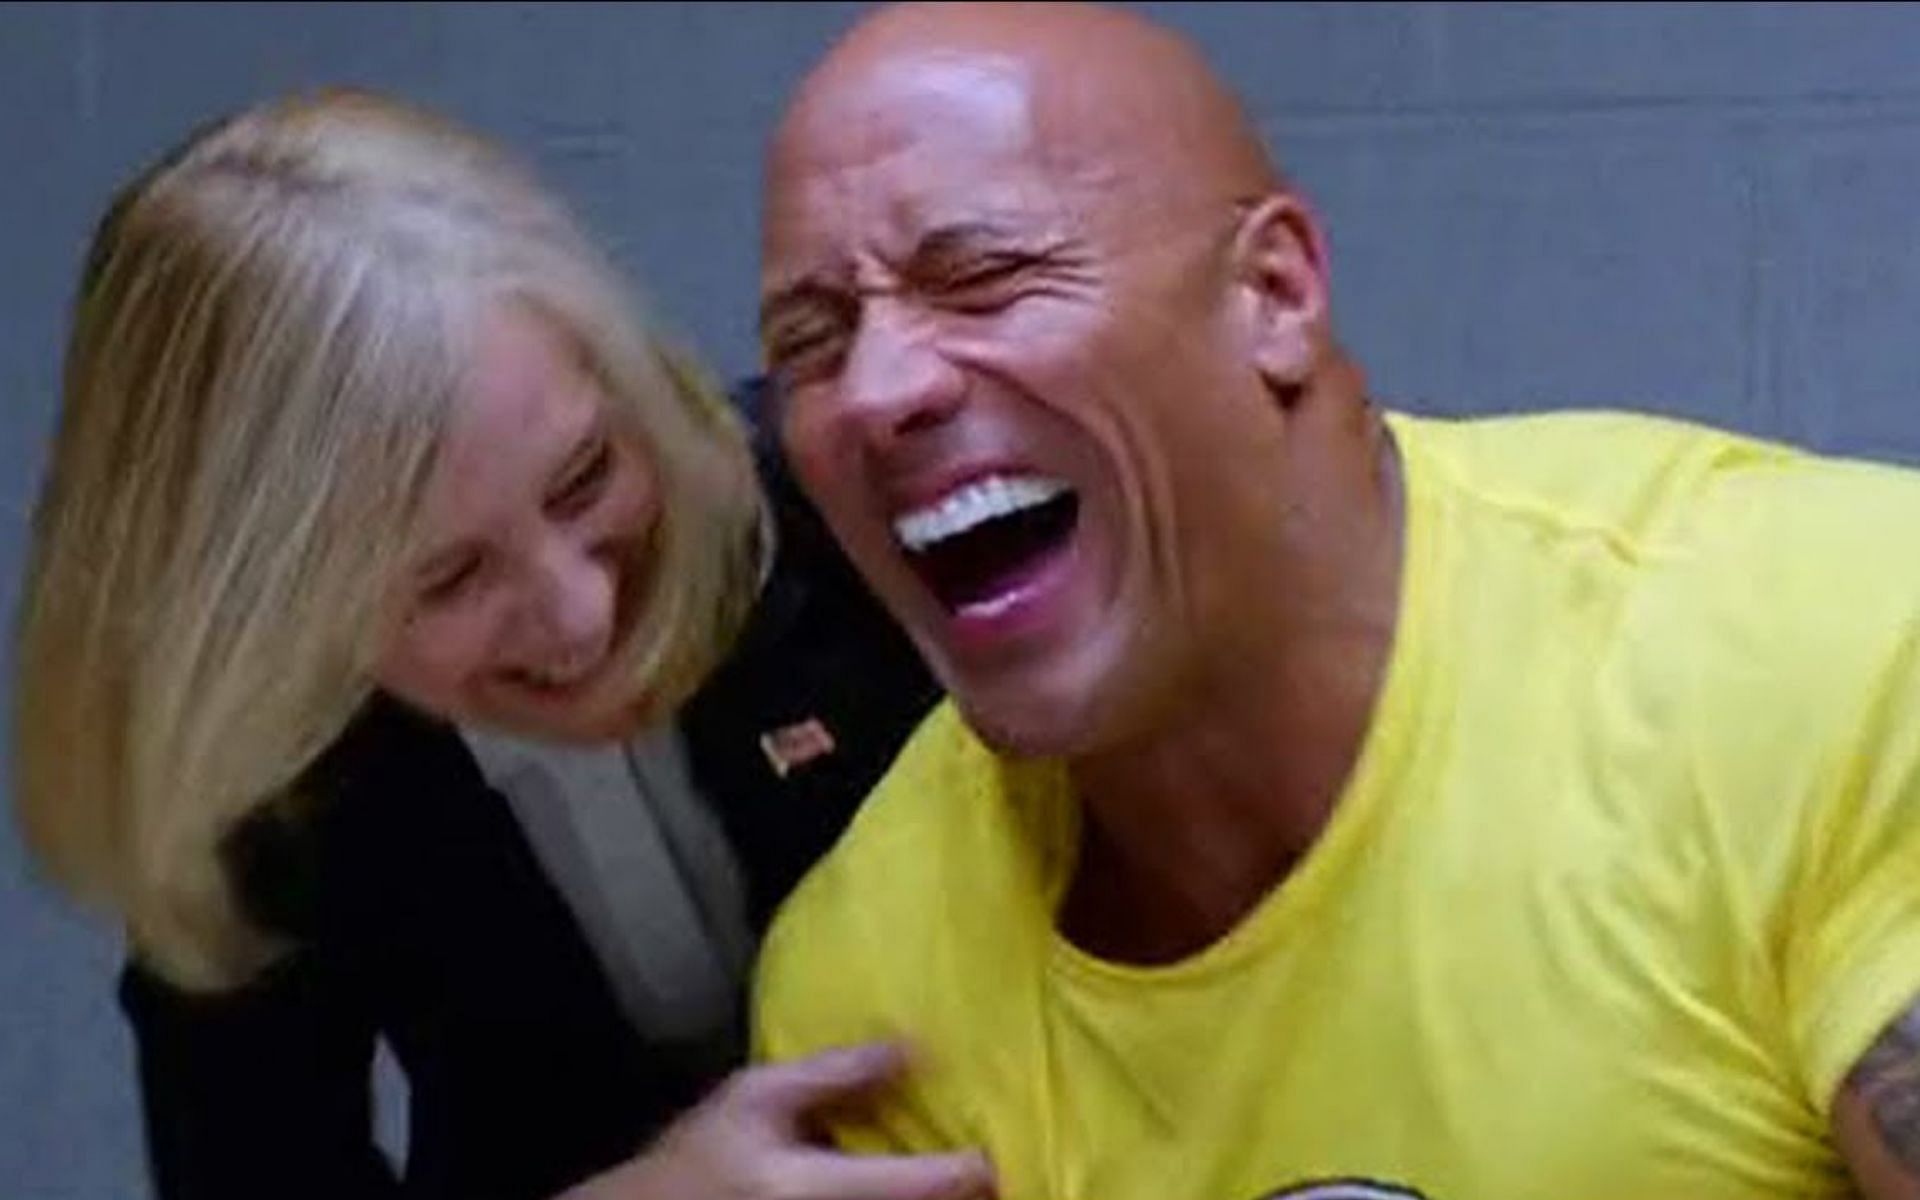 A subtle but hilarious tribute was paid to The Rock